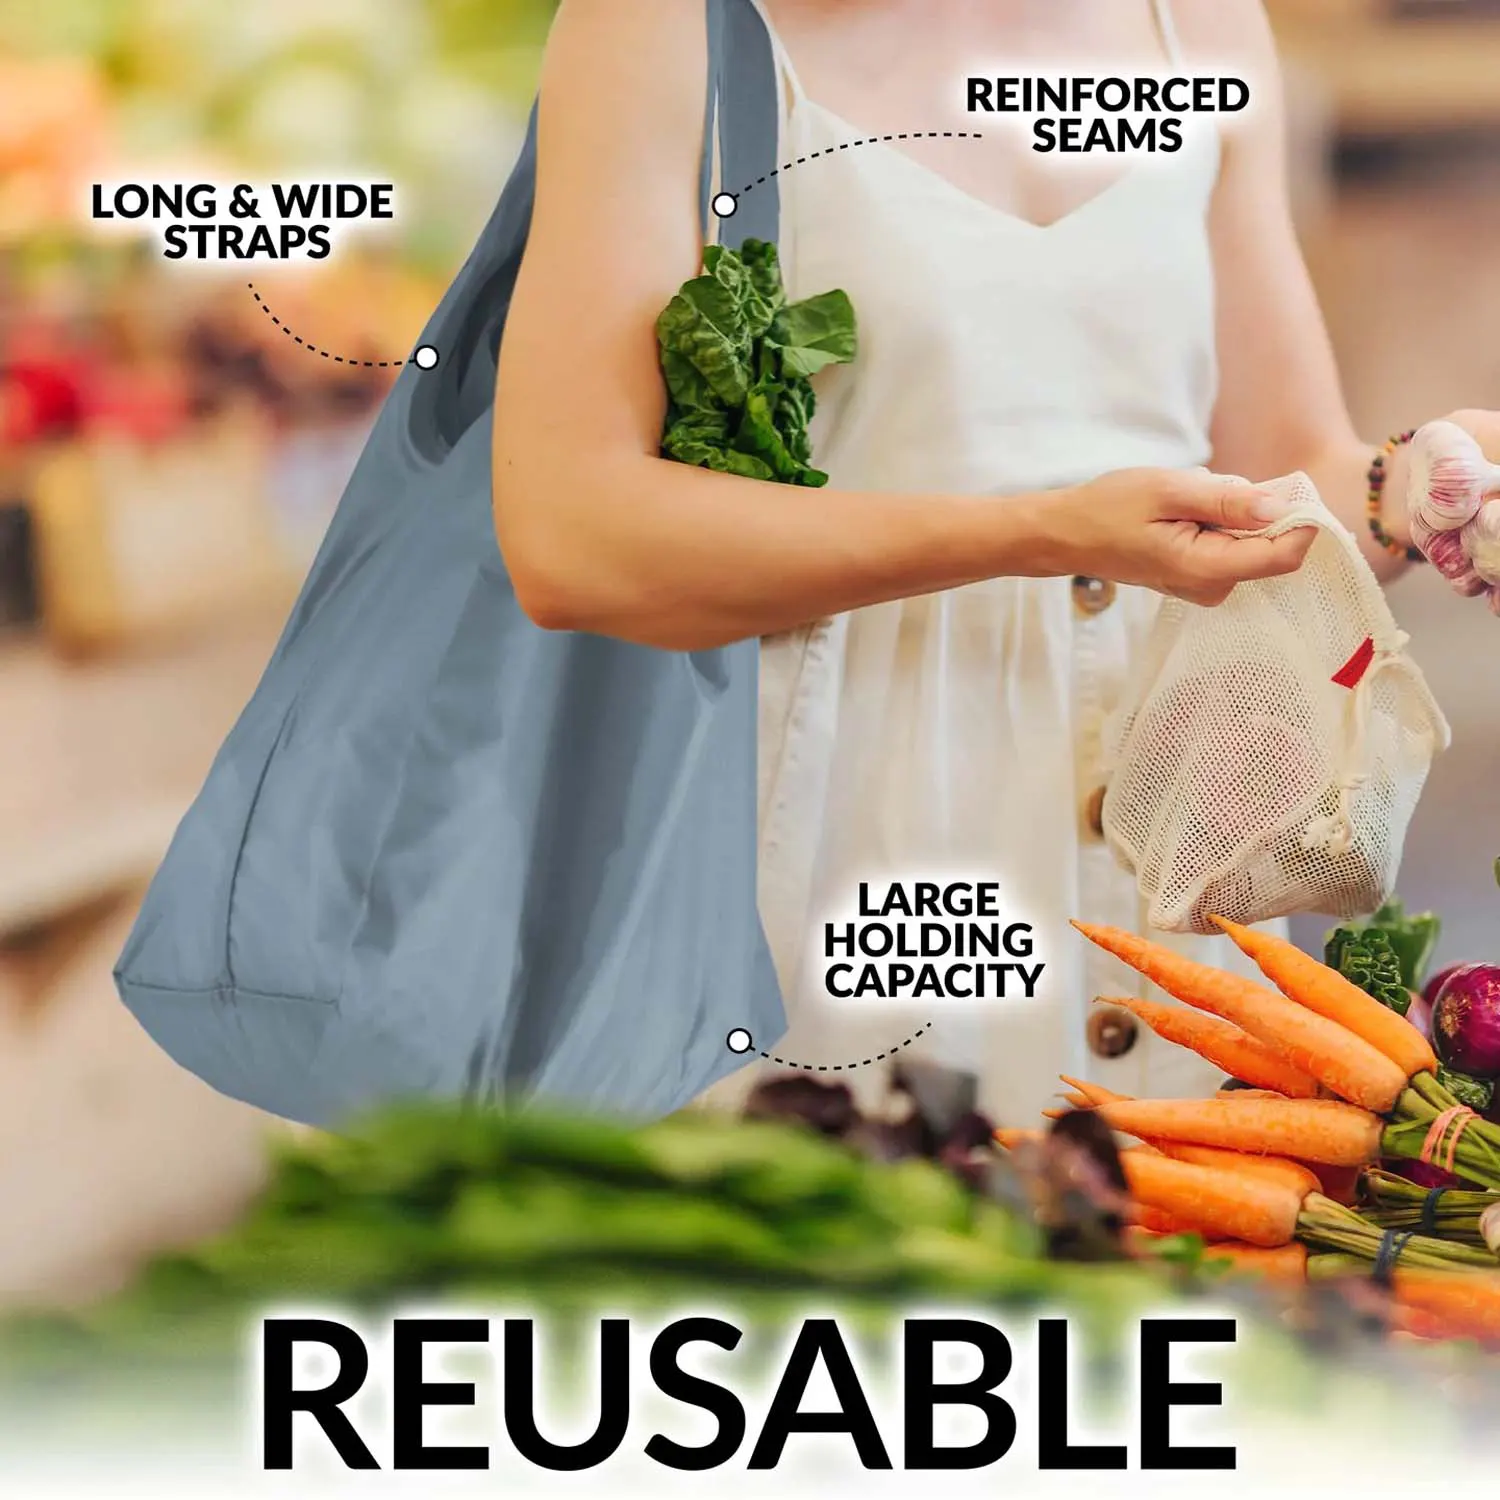 Reusable Grocery Bags - 5 Pack